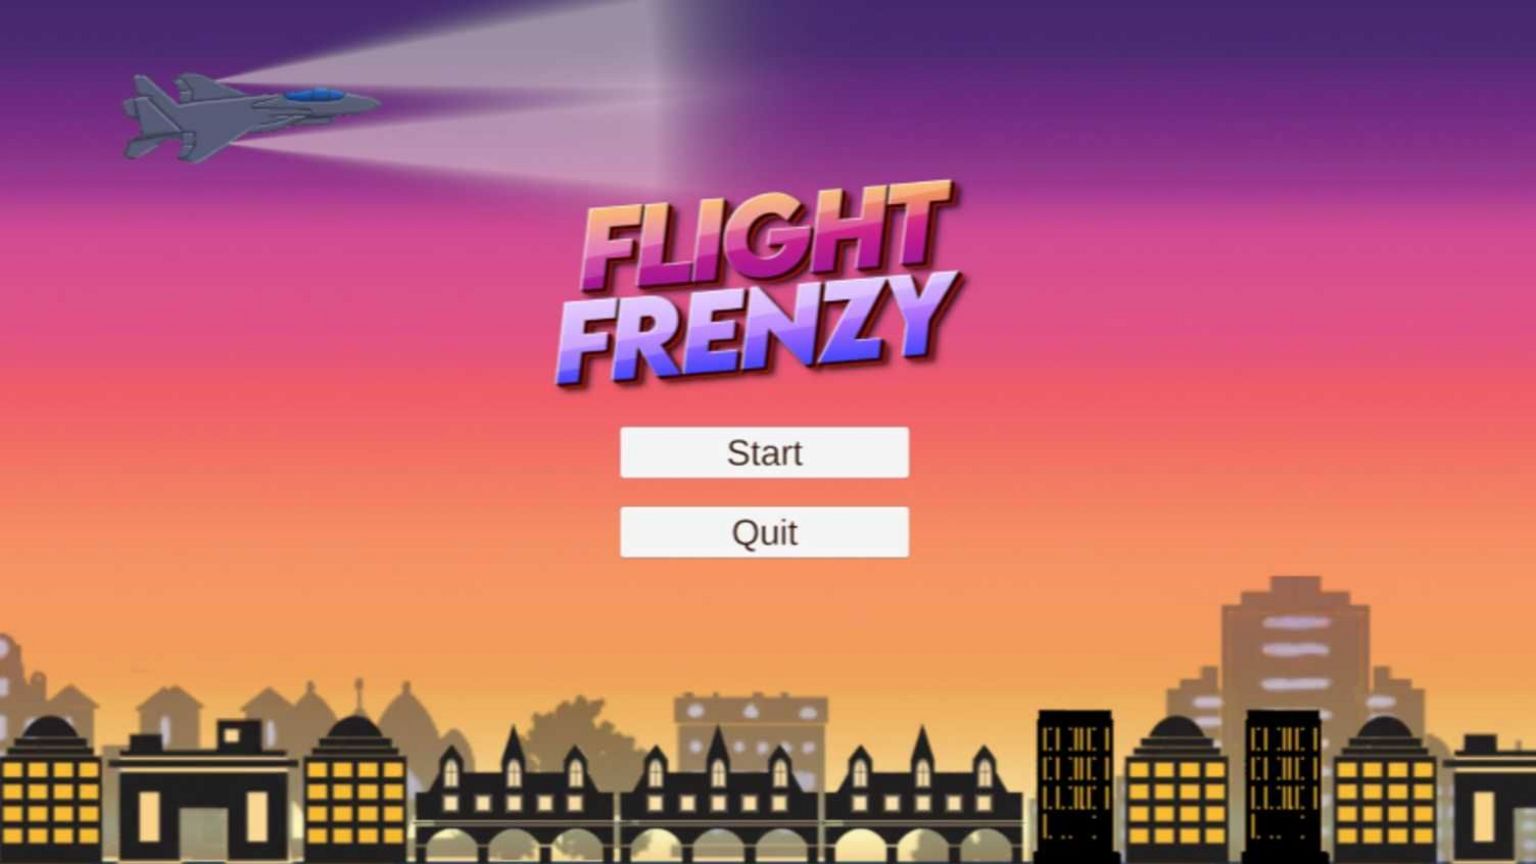 Title screen from Flight Frenzy game